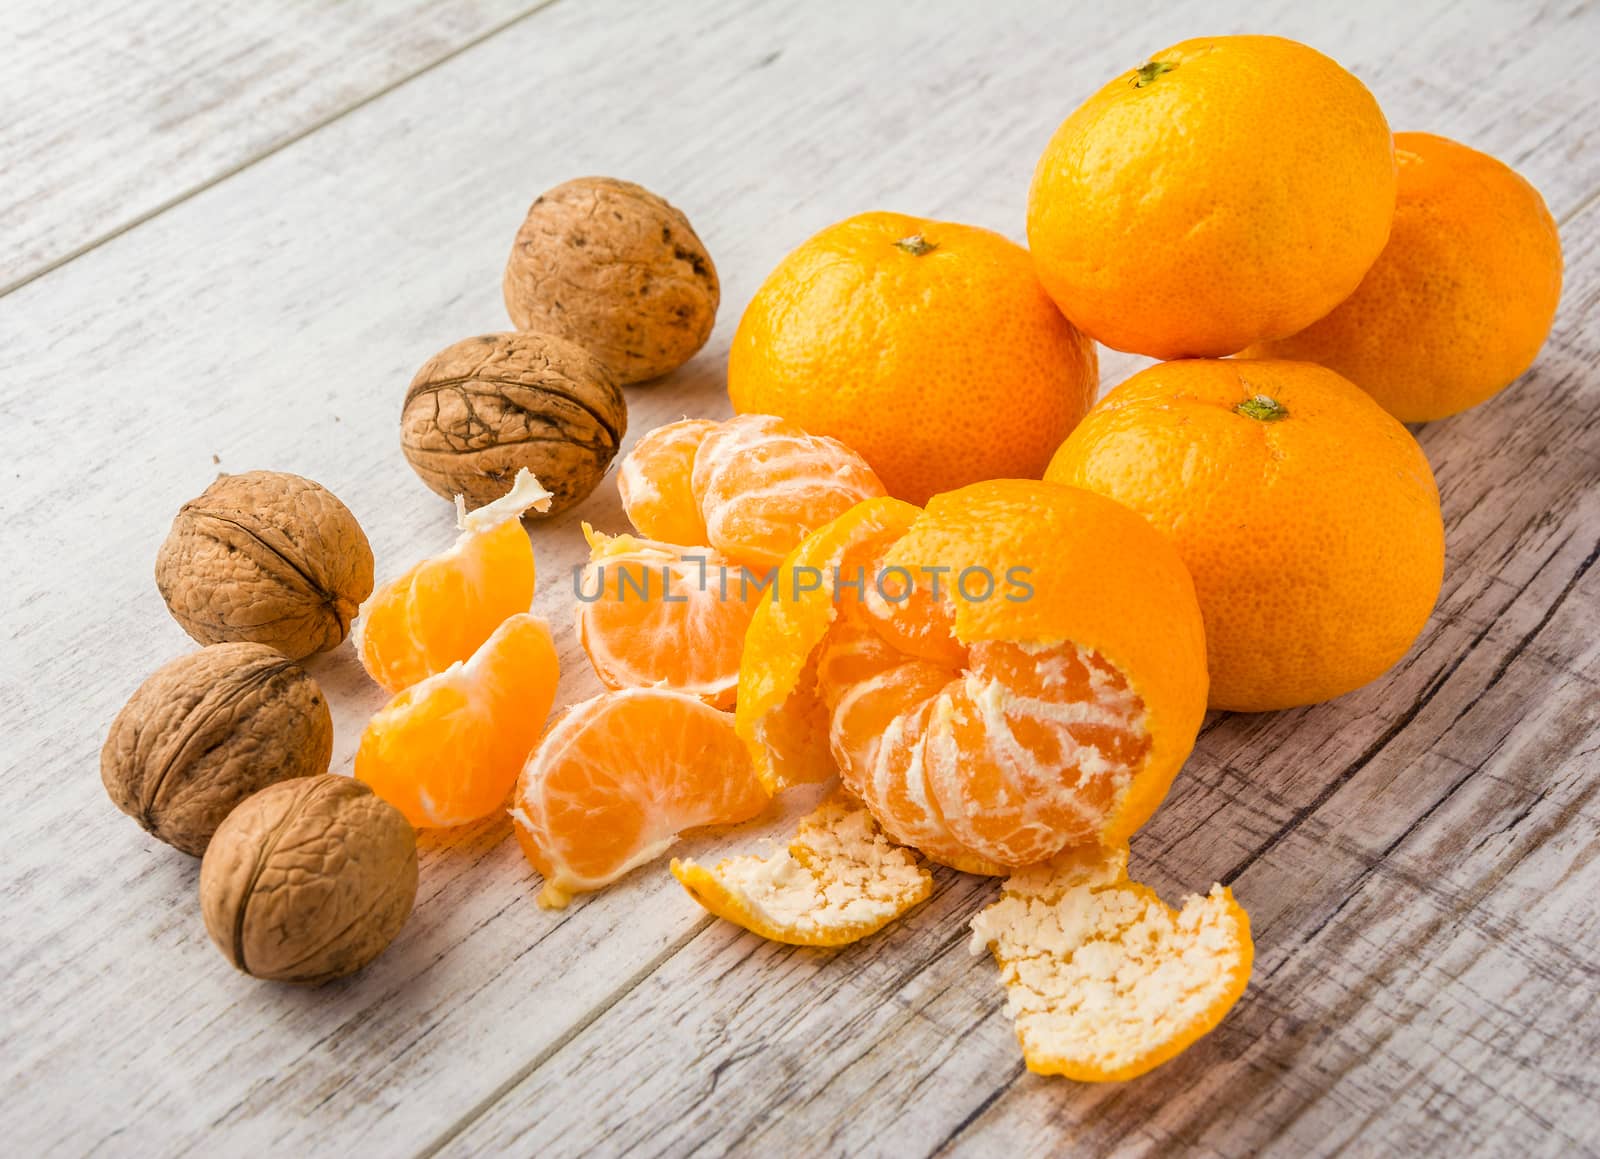 tangerines, peeled tangerine, tangerine slices and walnuts on a white wooden table